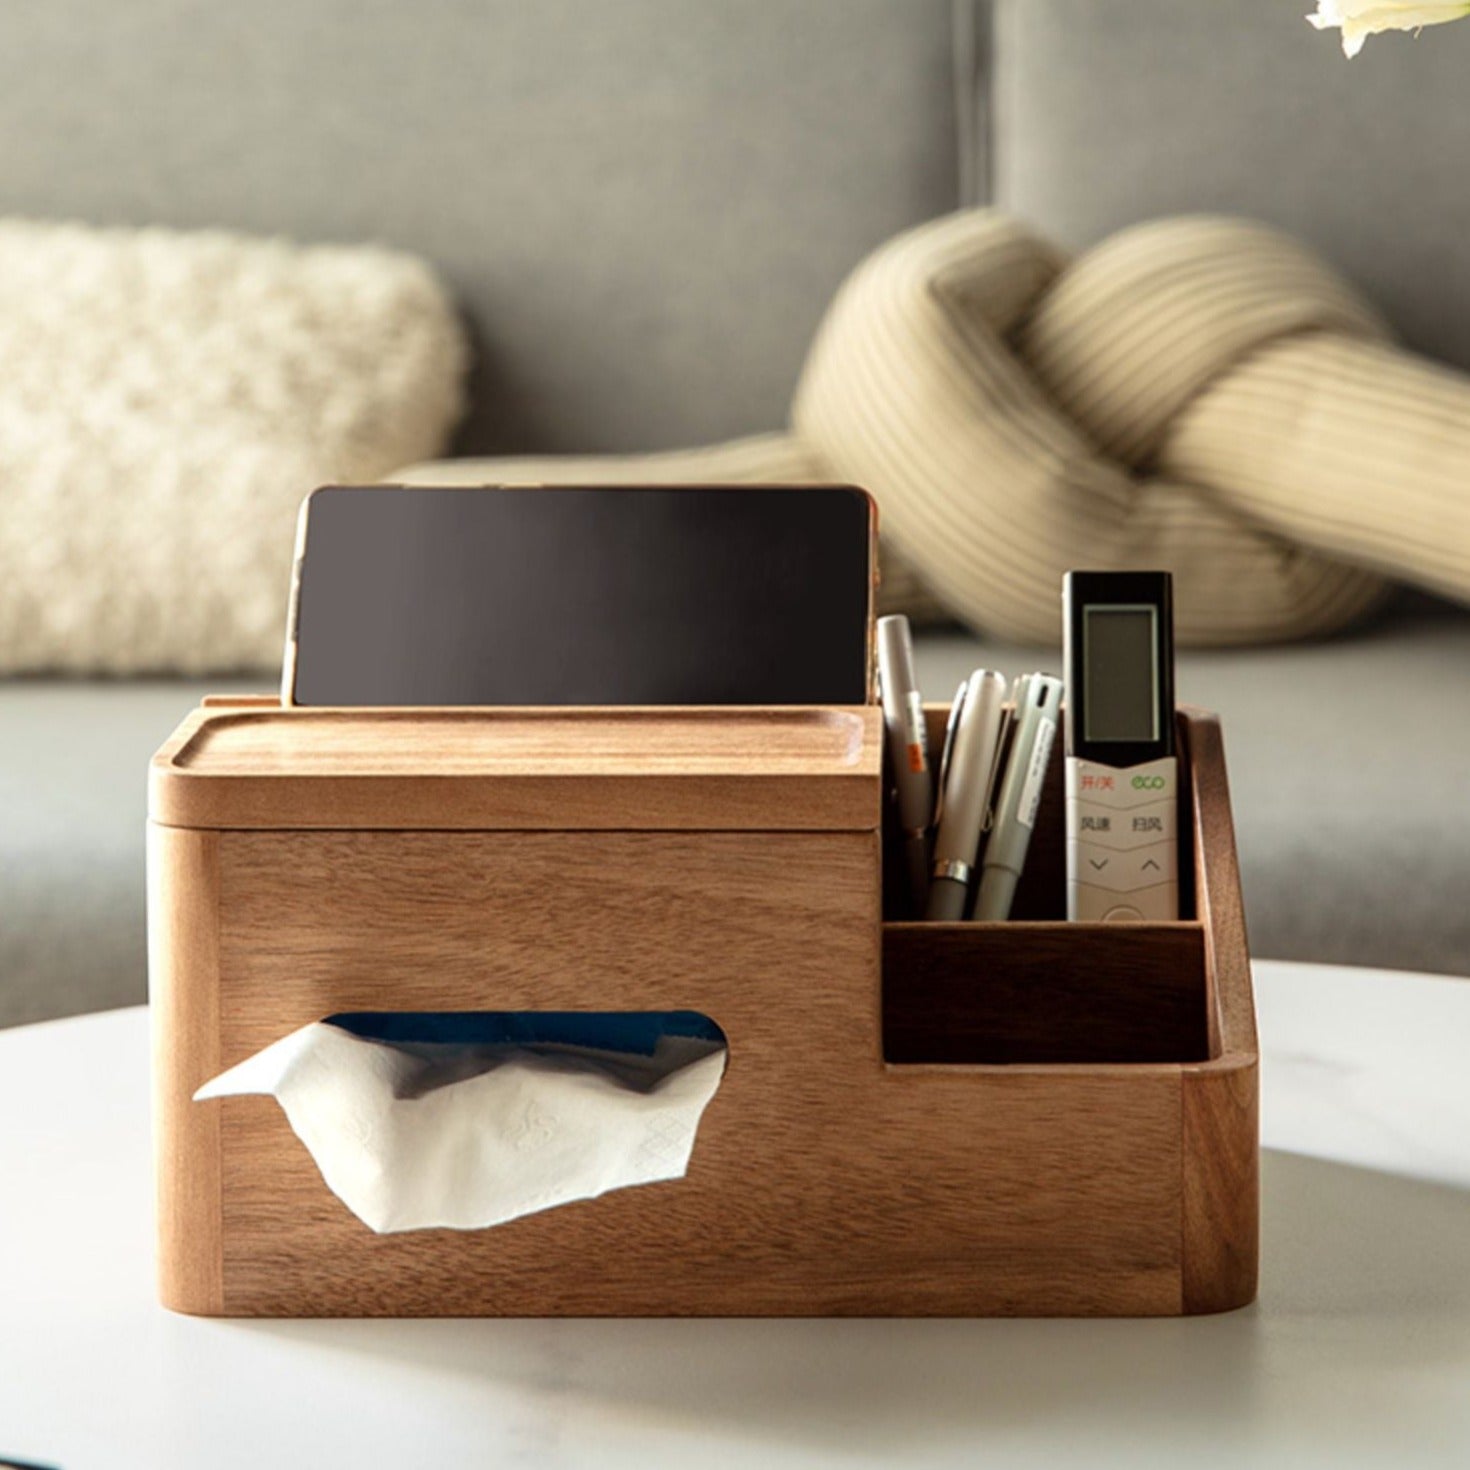 Solid wood multi-functional tissue box"